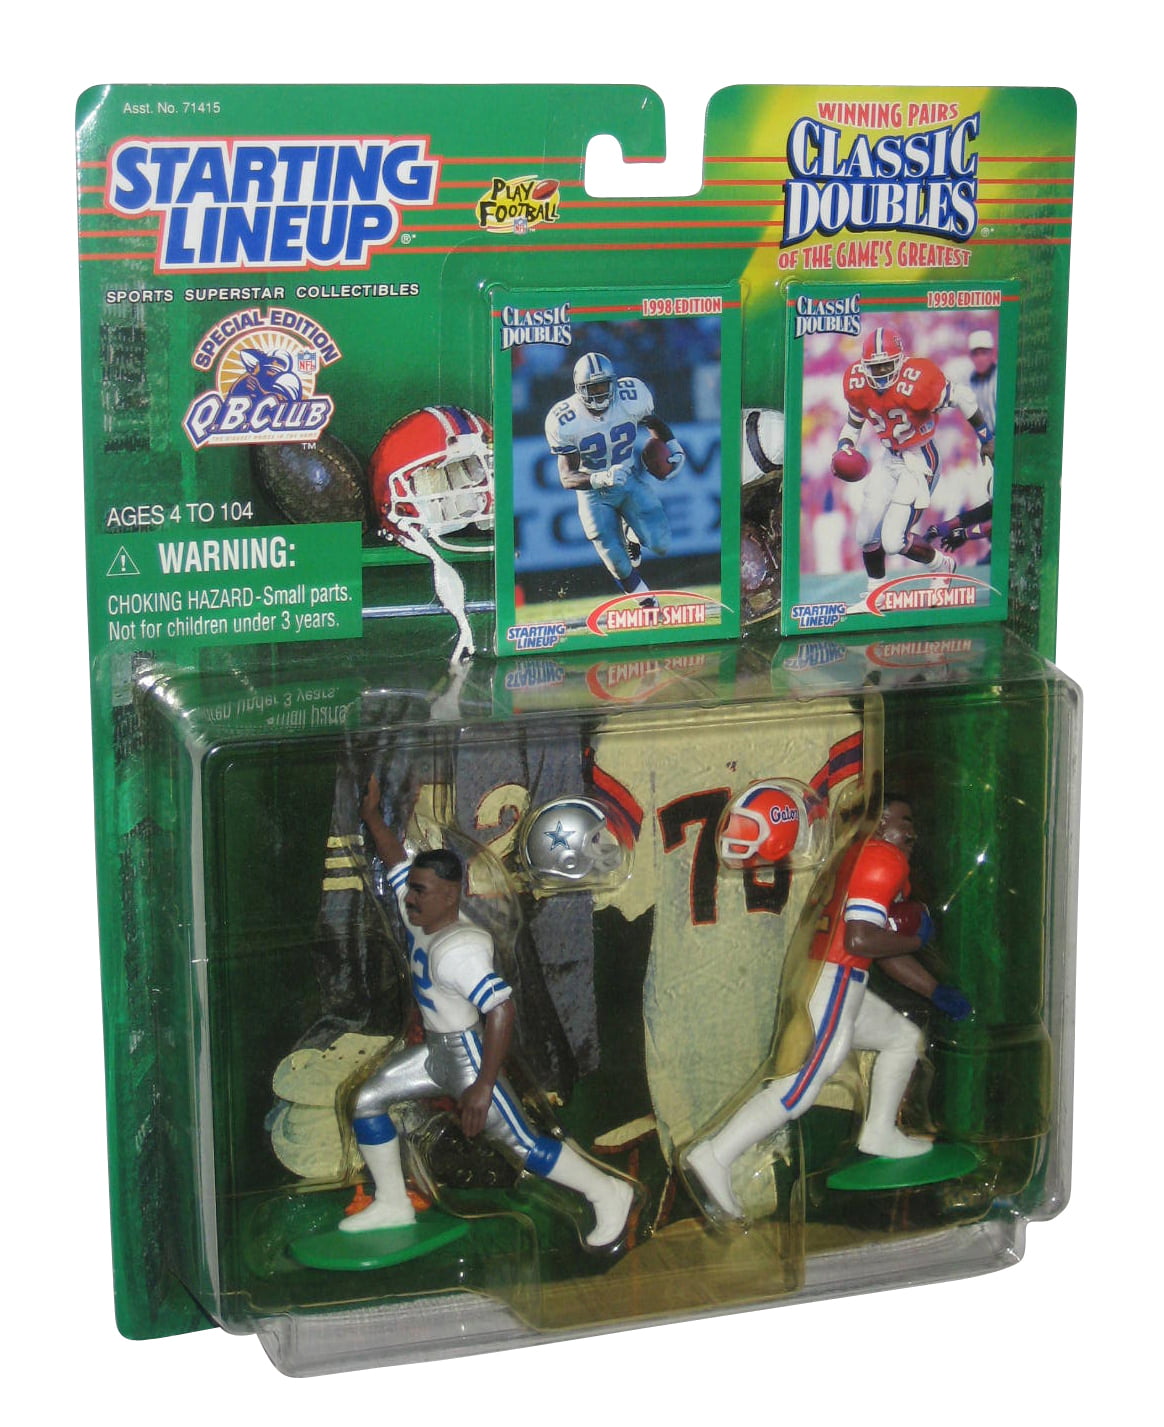 Starting Lineup Plastic Protector Case For Classic Doubles Kenner Figures 